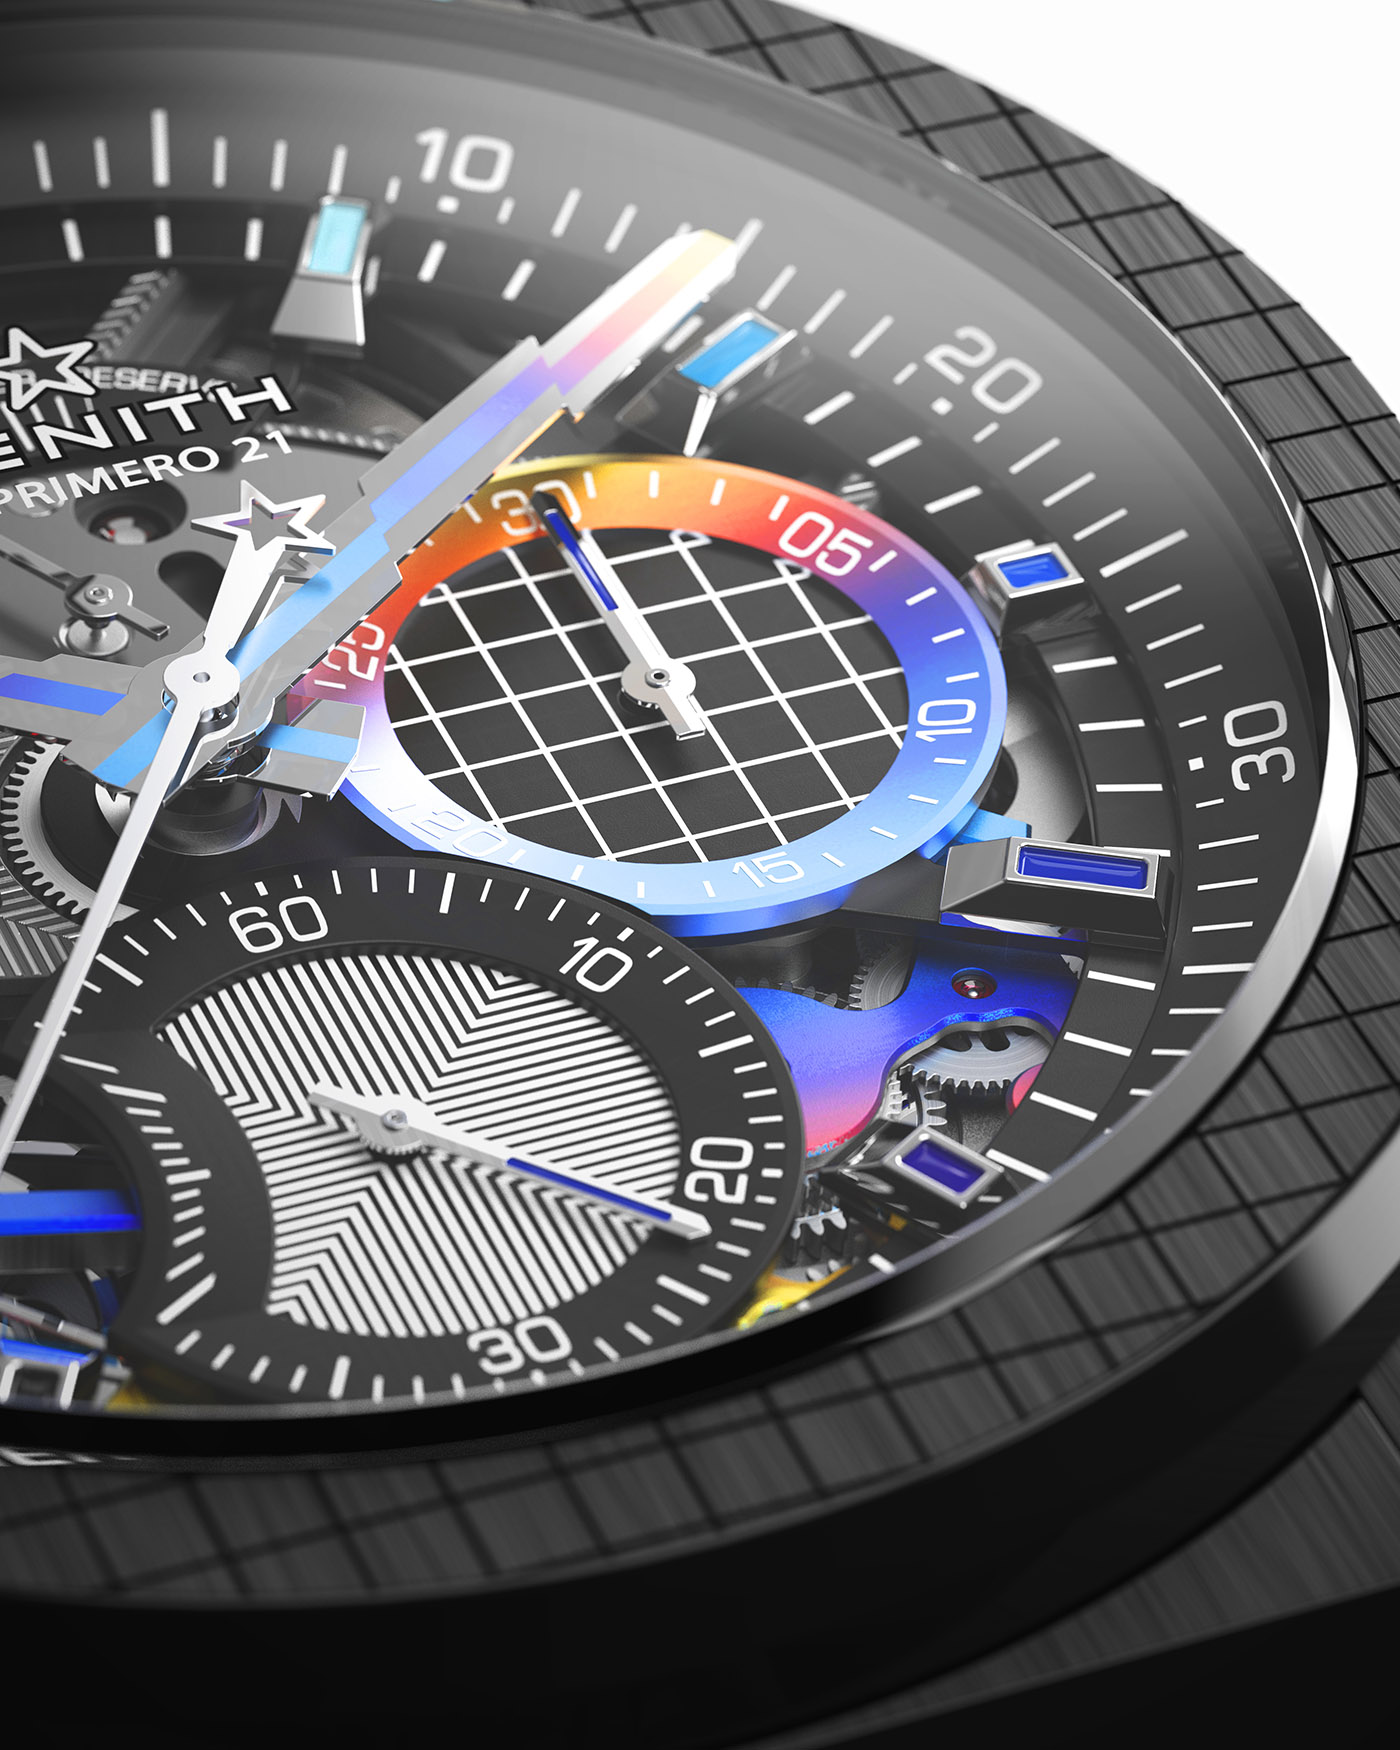 Zenith Defy Extreme Felipe Pantone – The Watch Pages